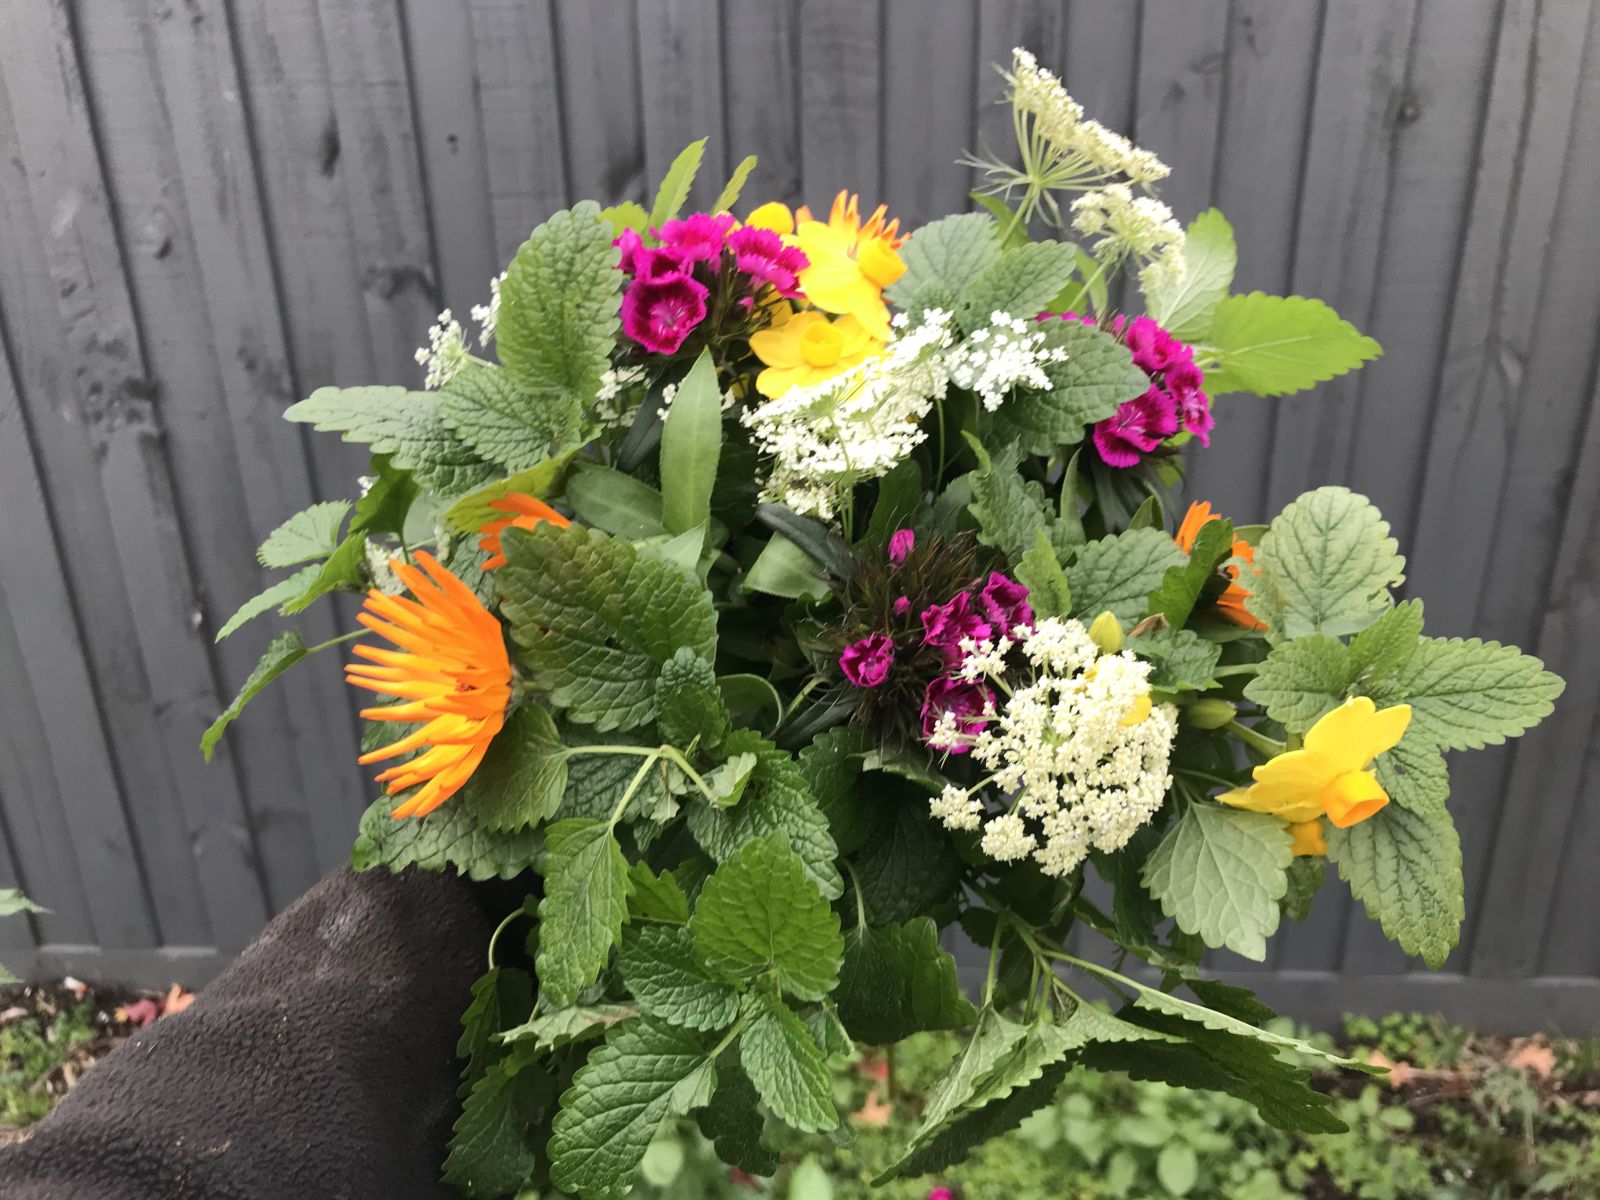 A bouquet with garden flowers and lemon balm